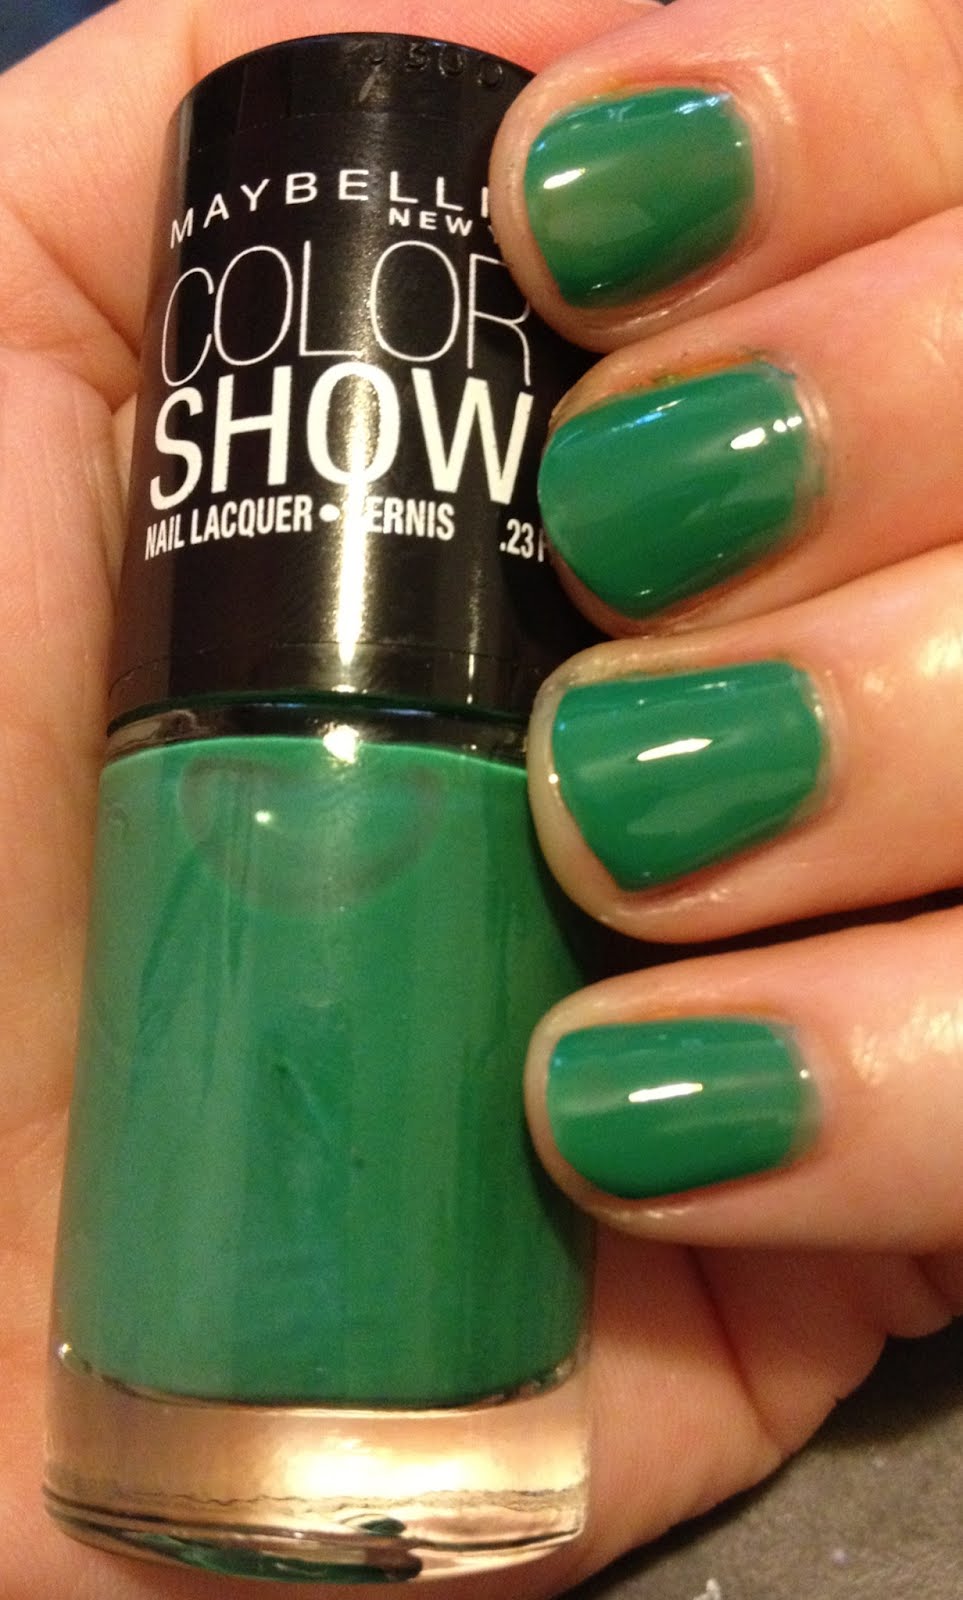 The Beauty Of Life Maybelline Color Show Nail Lacquer Swatches My